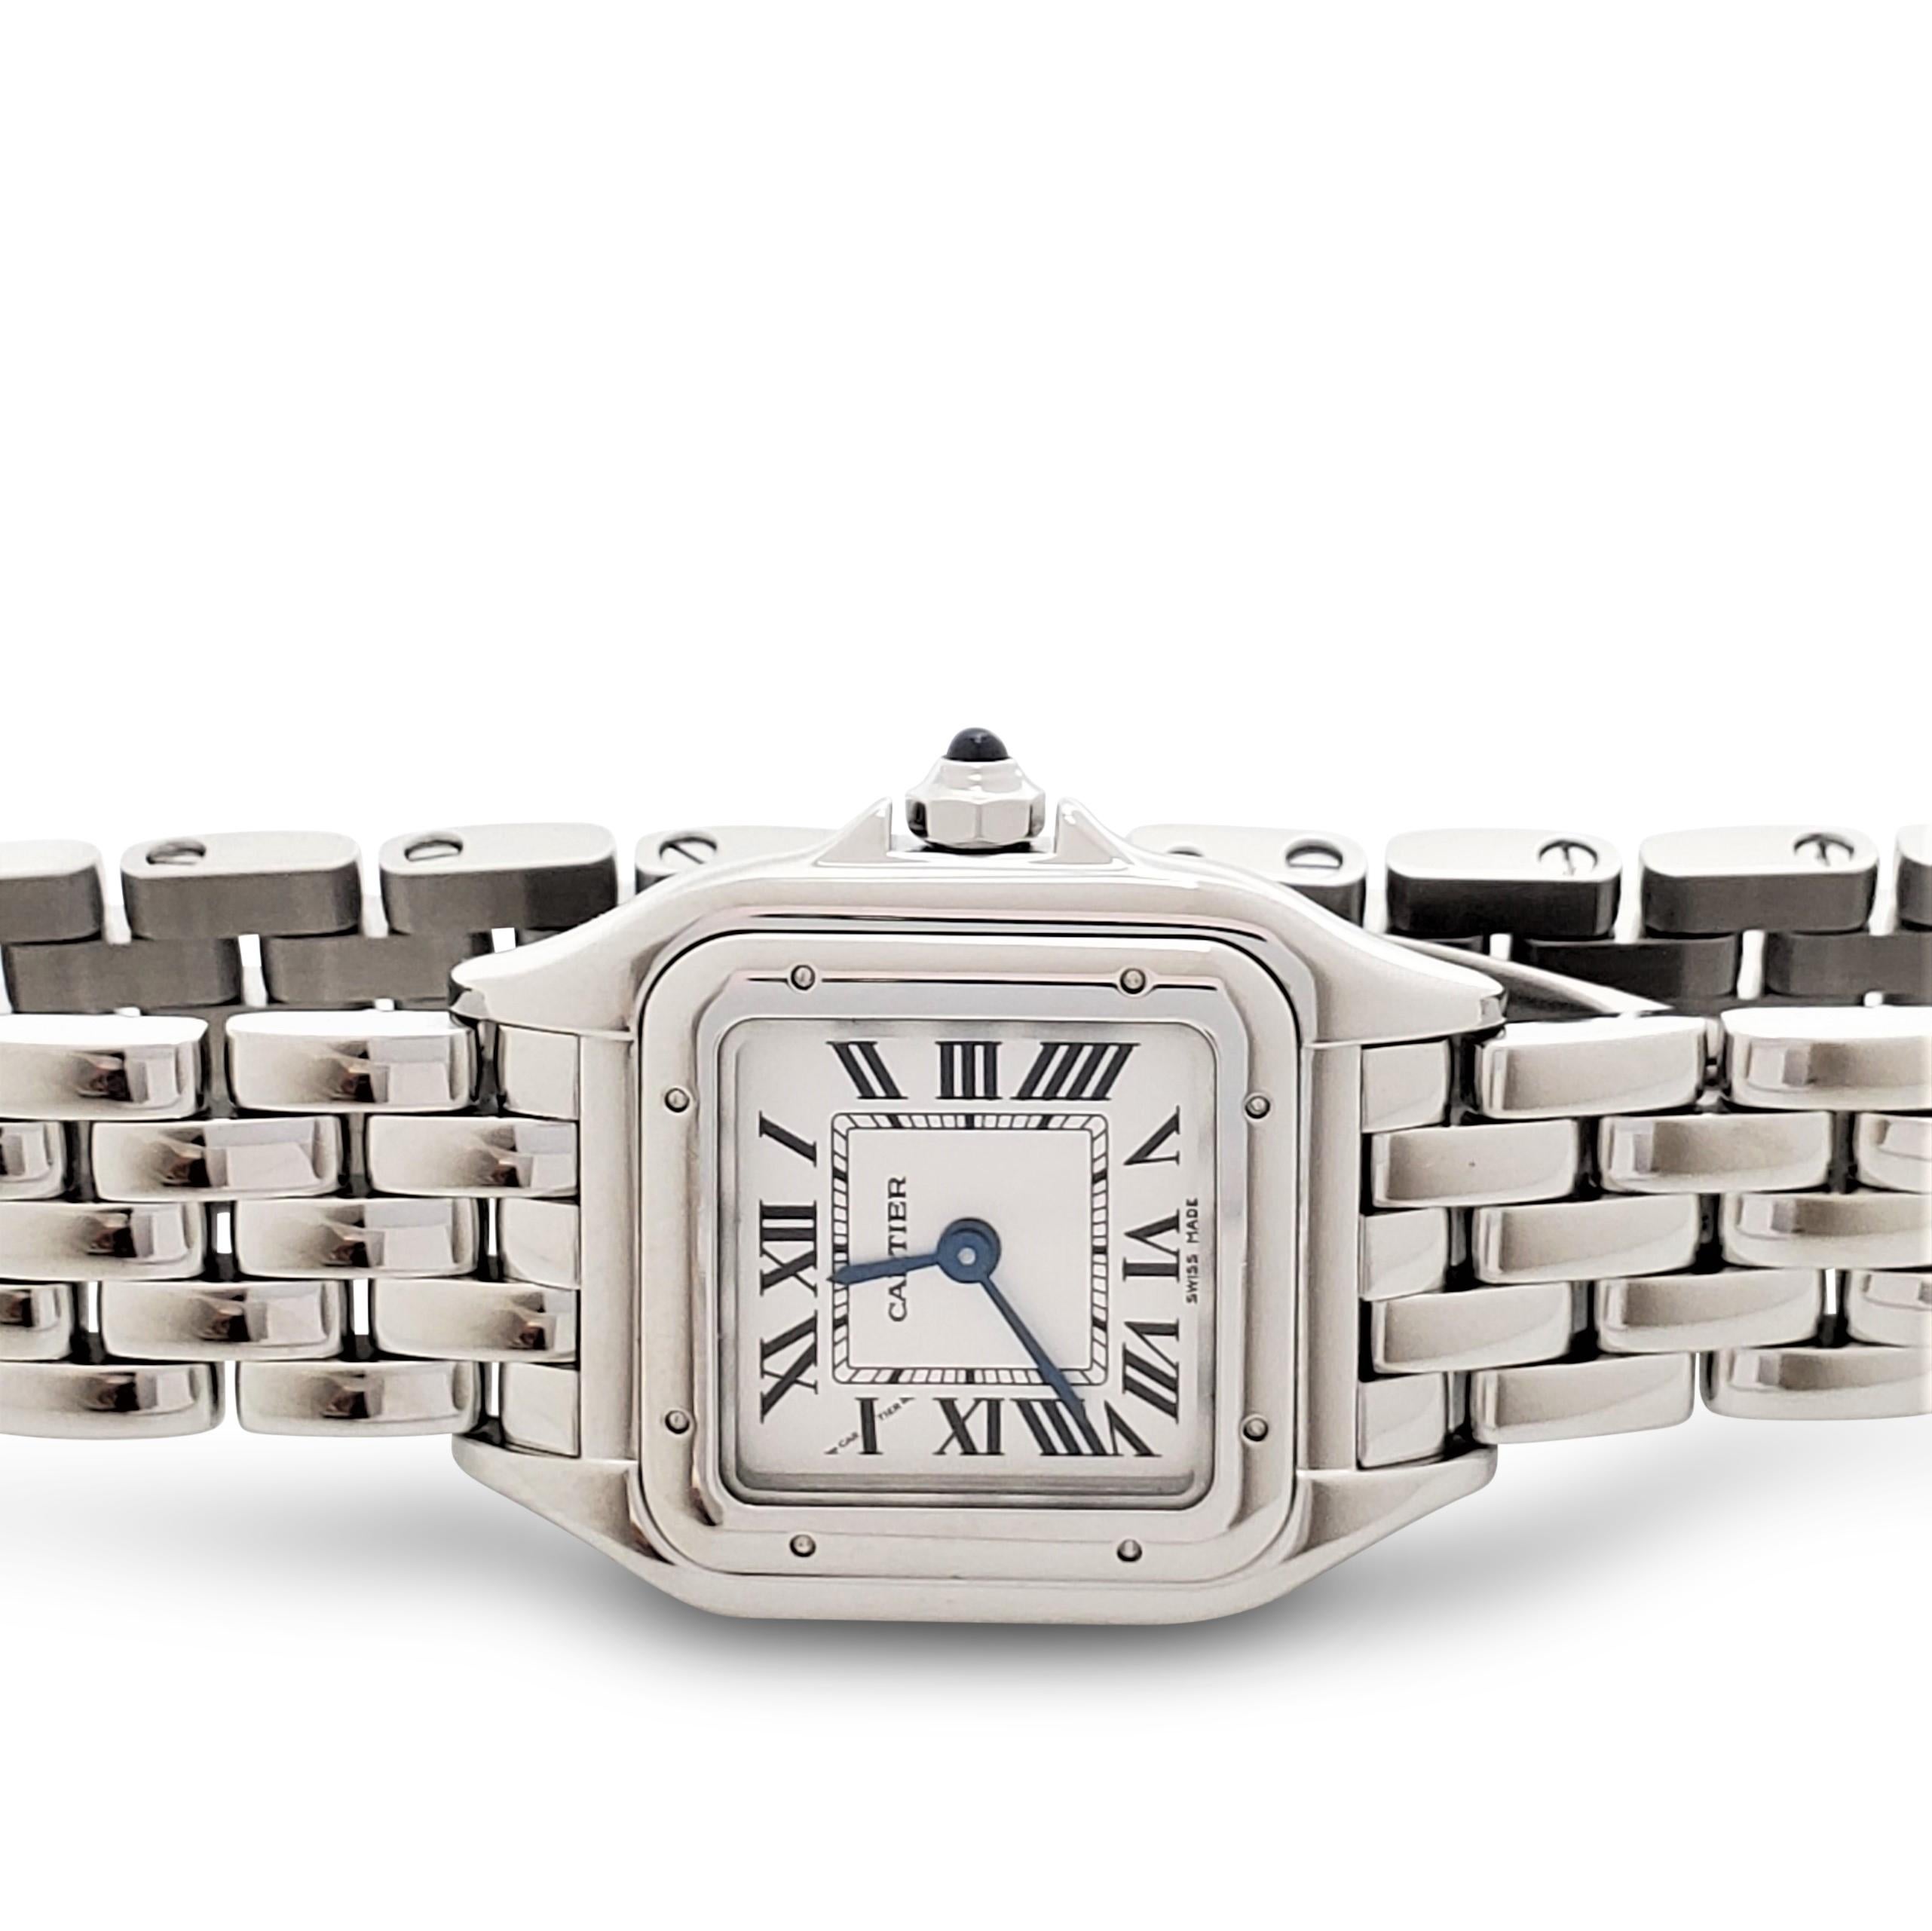 Authentic, classic, and refined Cartier 'Panthère de Cartier' watch defined by its clean lines and rounded corners. The medium-sized stainless steel timepiece features a jewelry-like maillon bracelet. The silvered face is completed with blued-steel